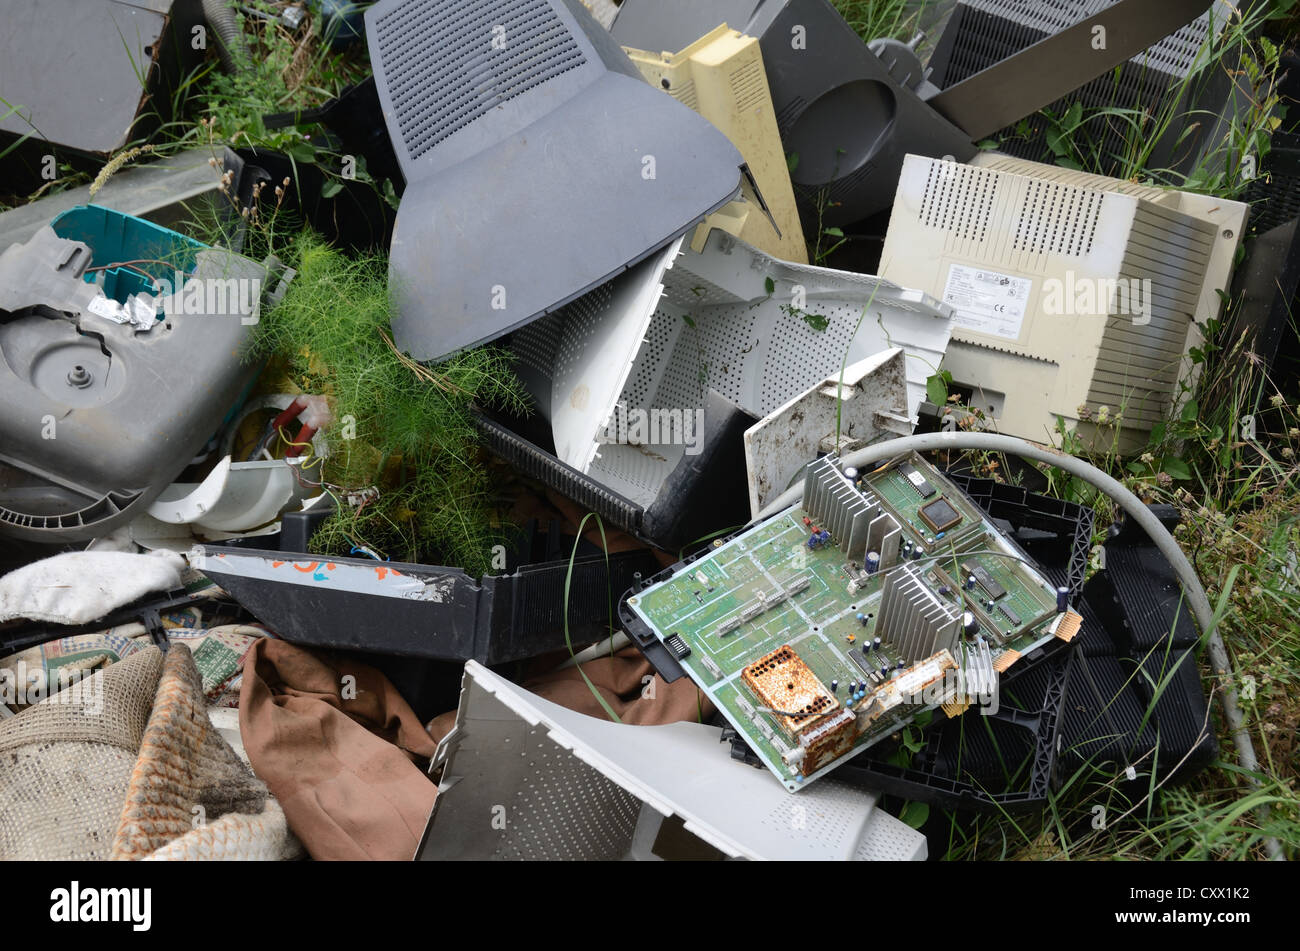 Discarded Computers and Hard Drives in Dump or Waste Tip Provence France Stock Photo